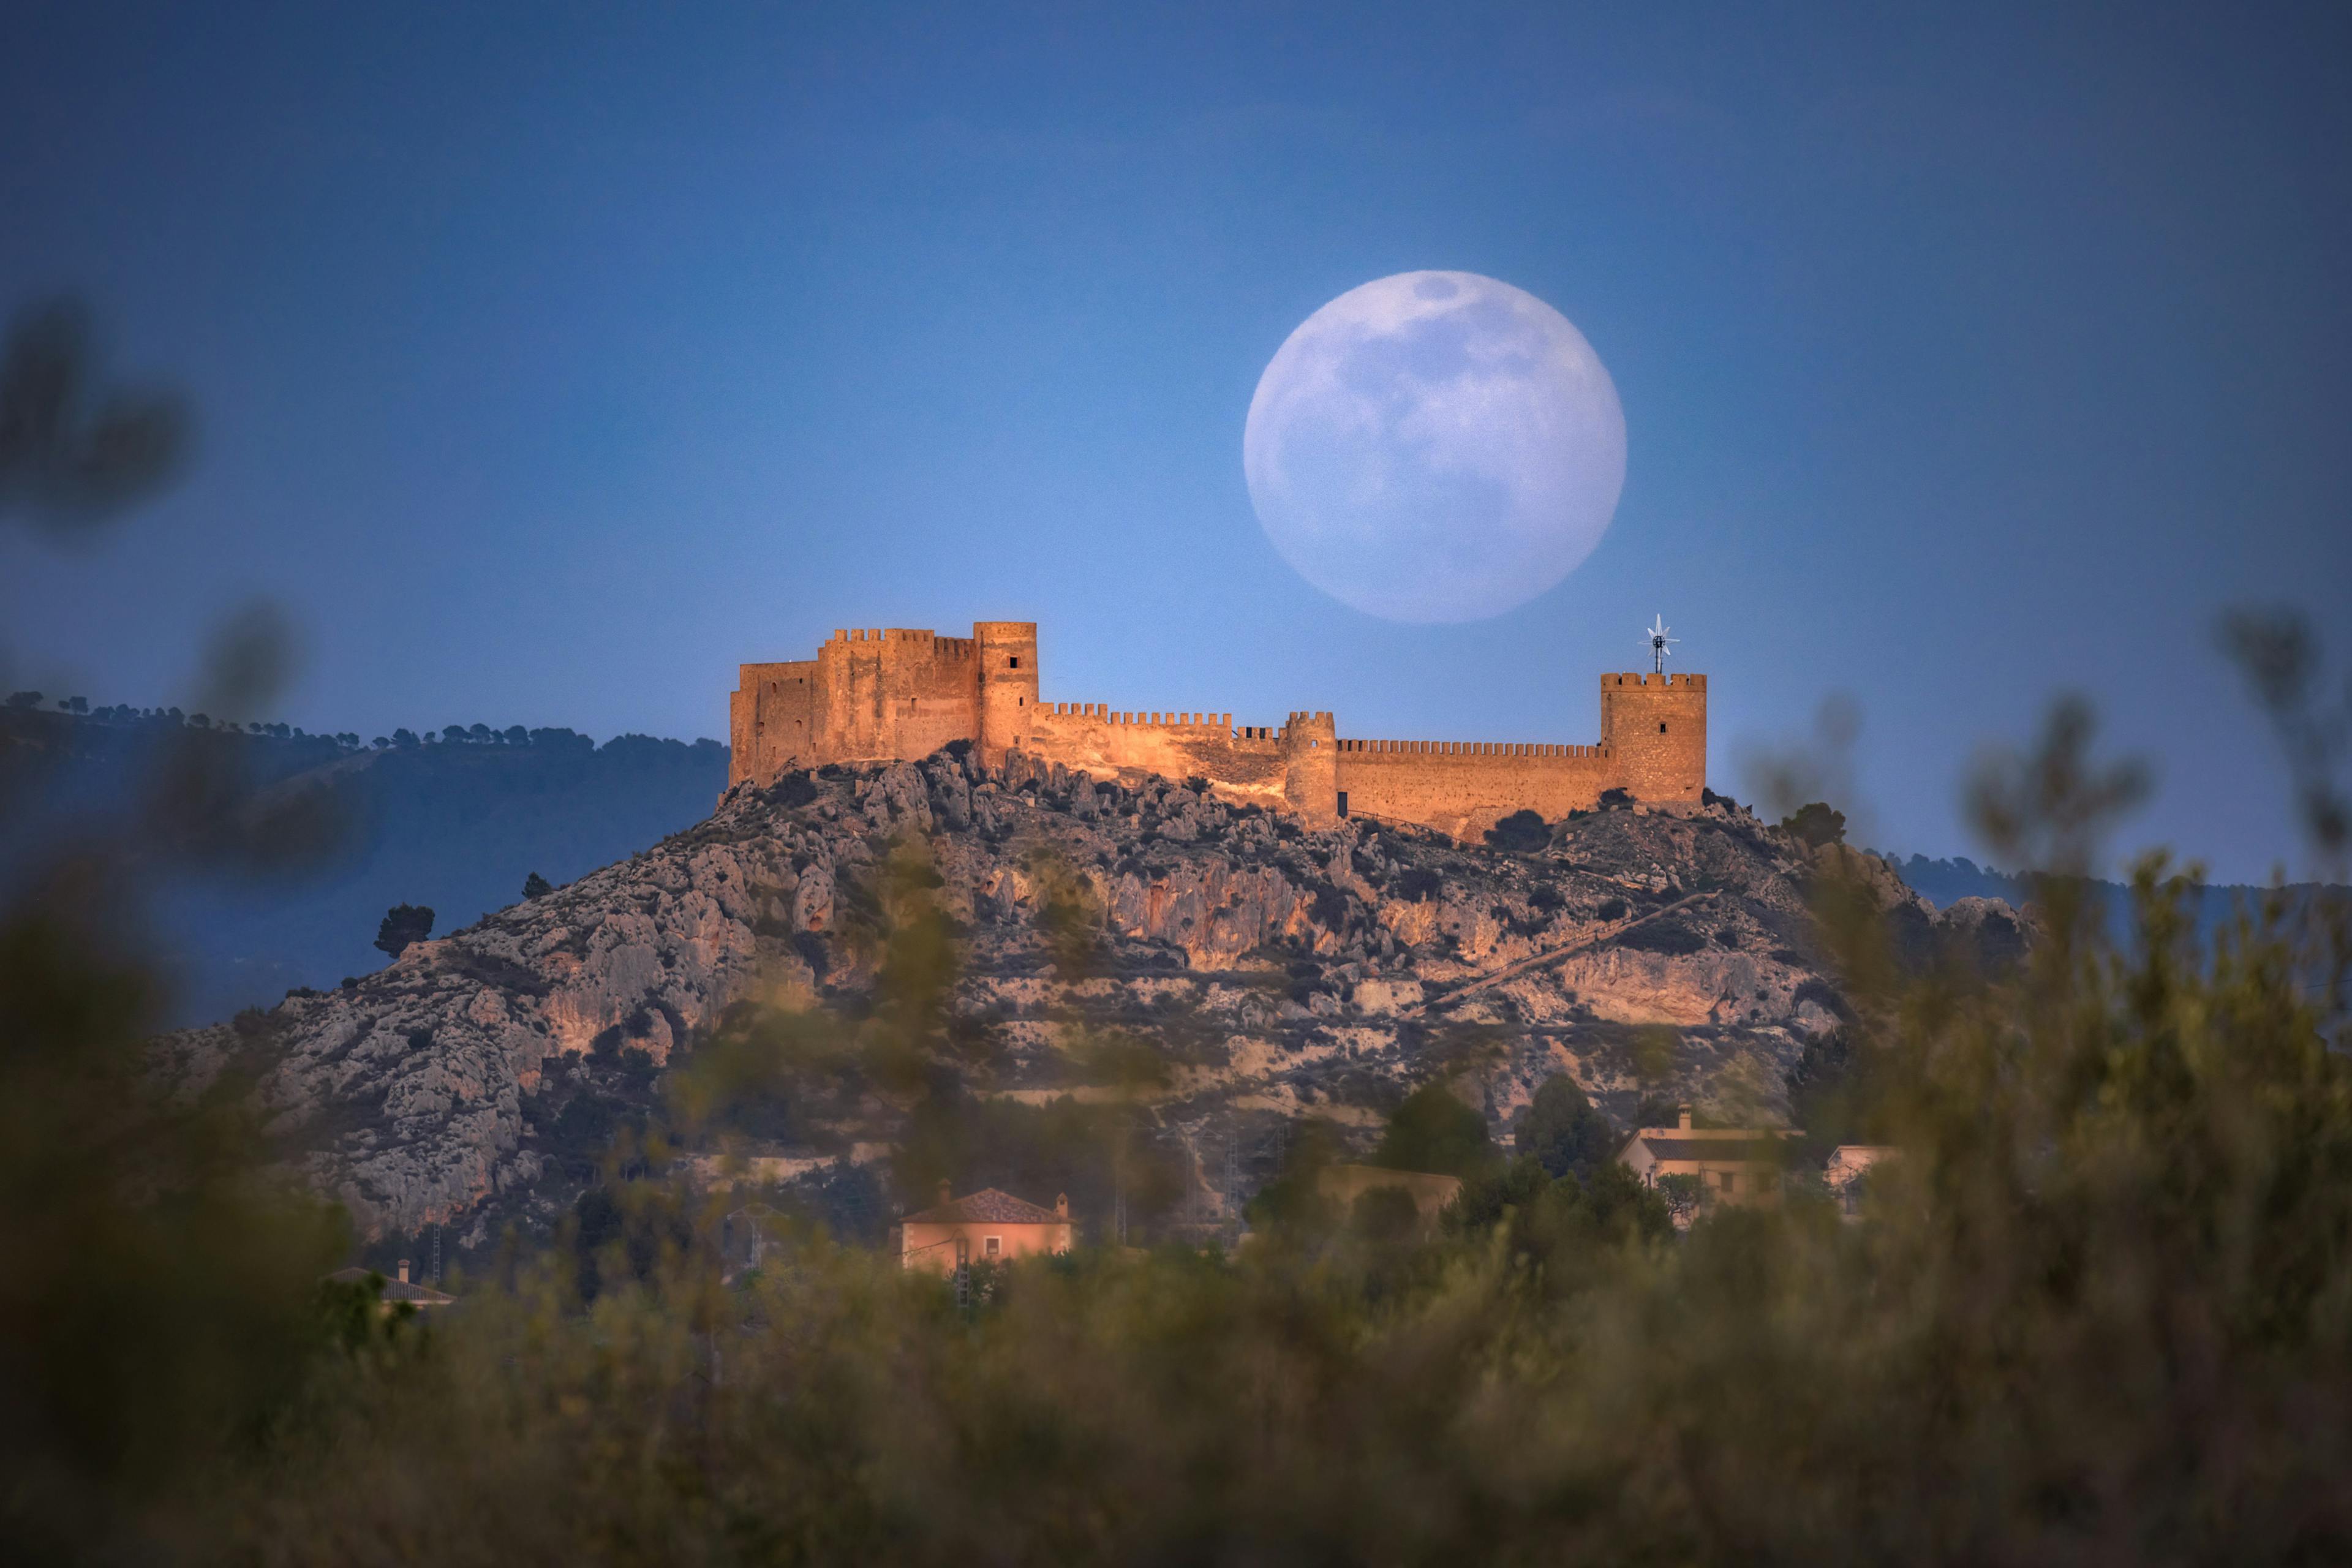 The Castle and the Moon (II)